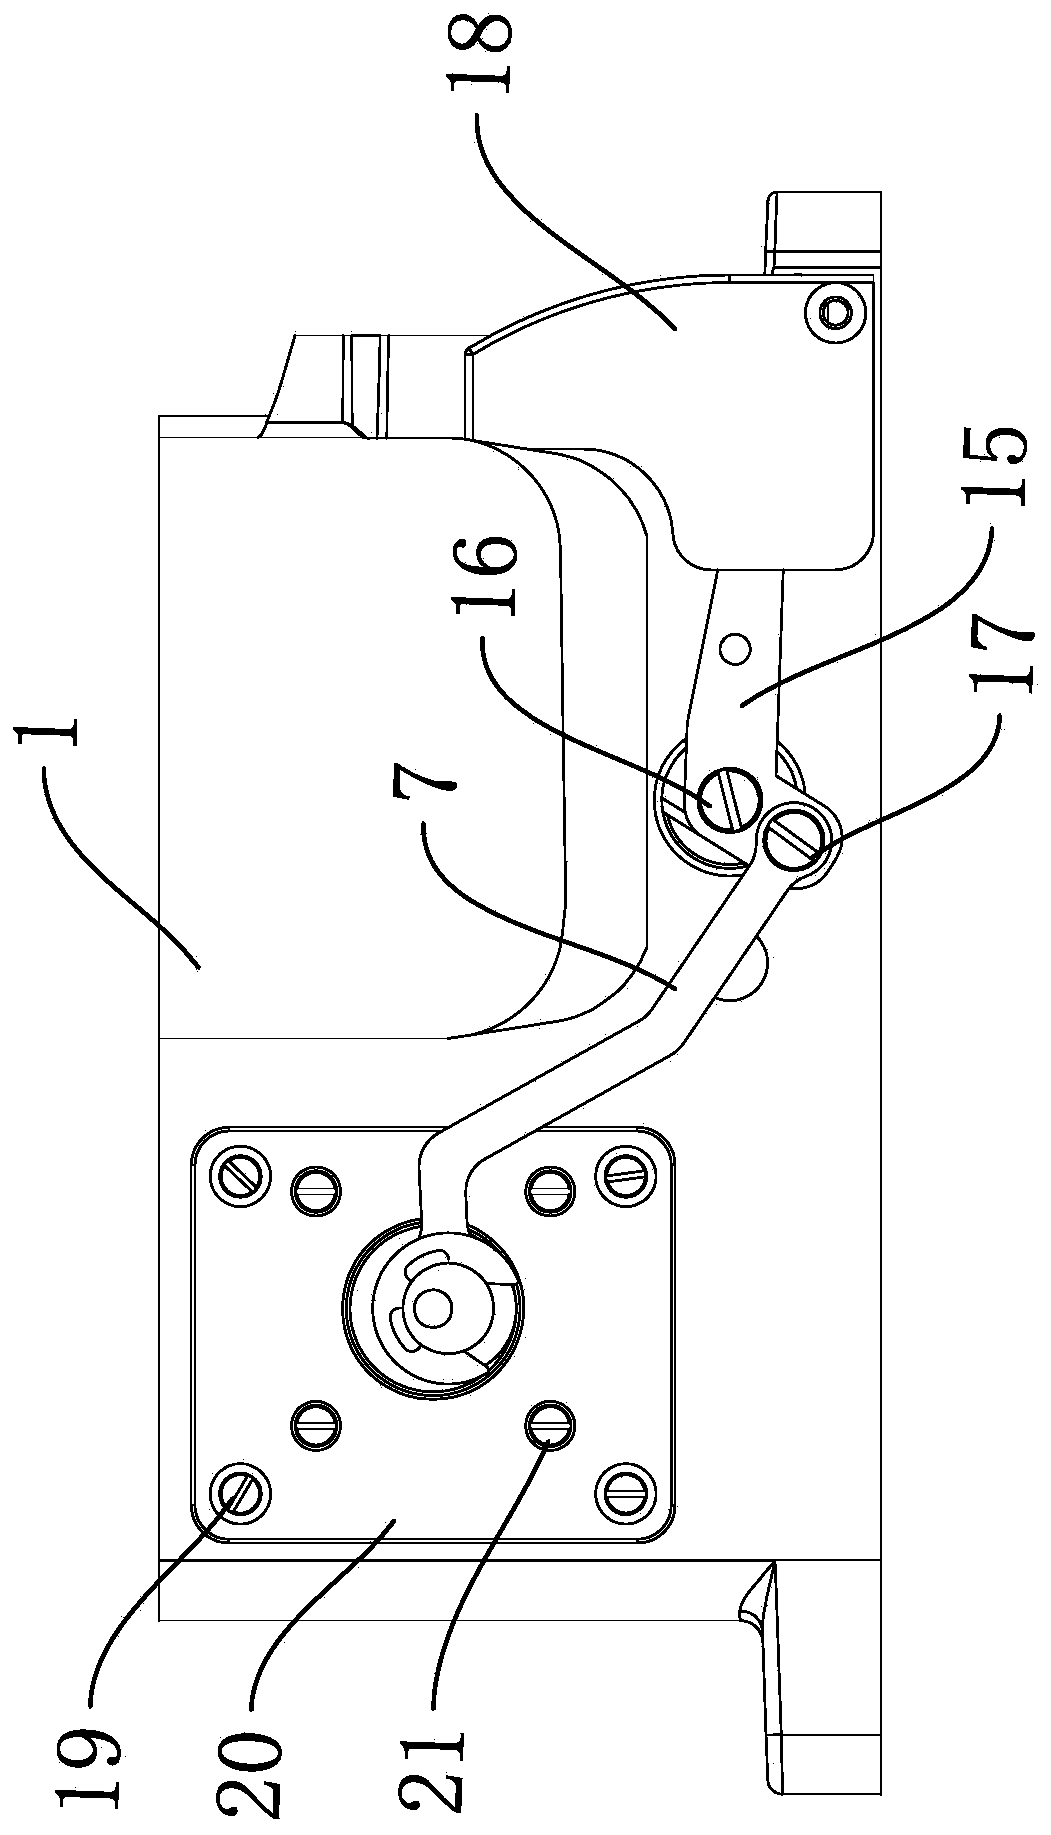 Stitch length adjusting structure of sewing machine